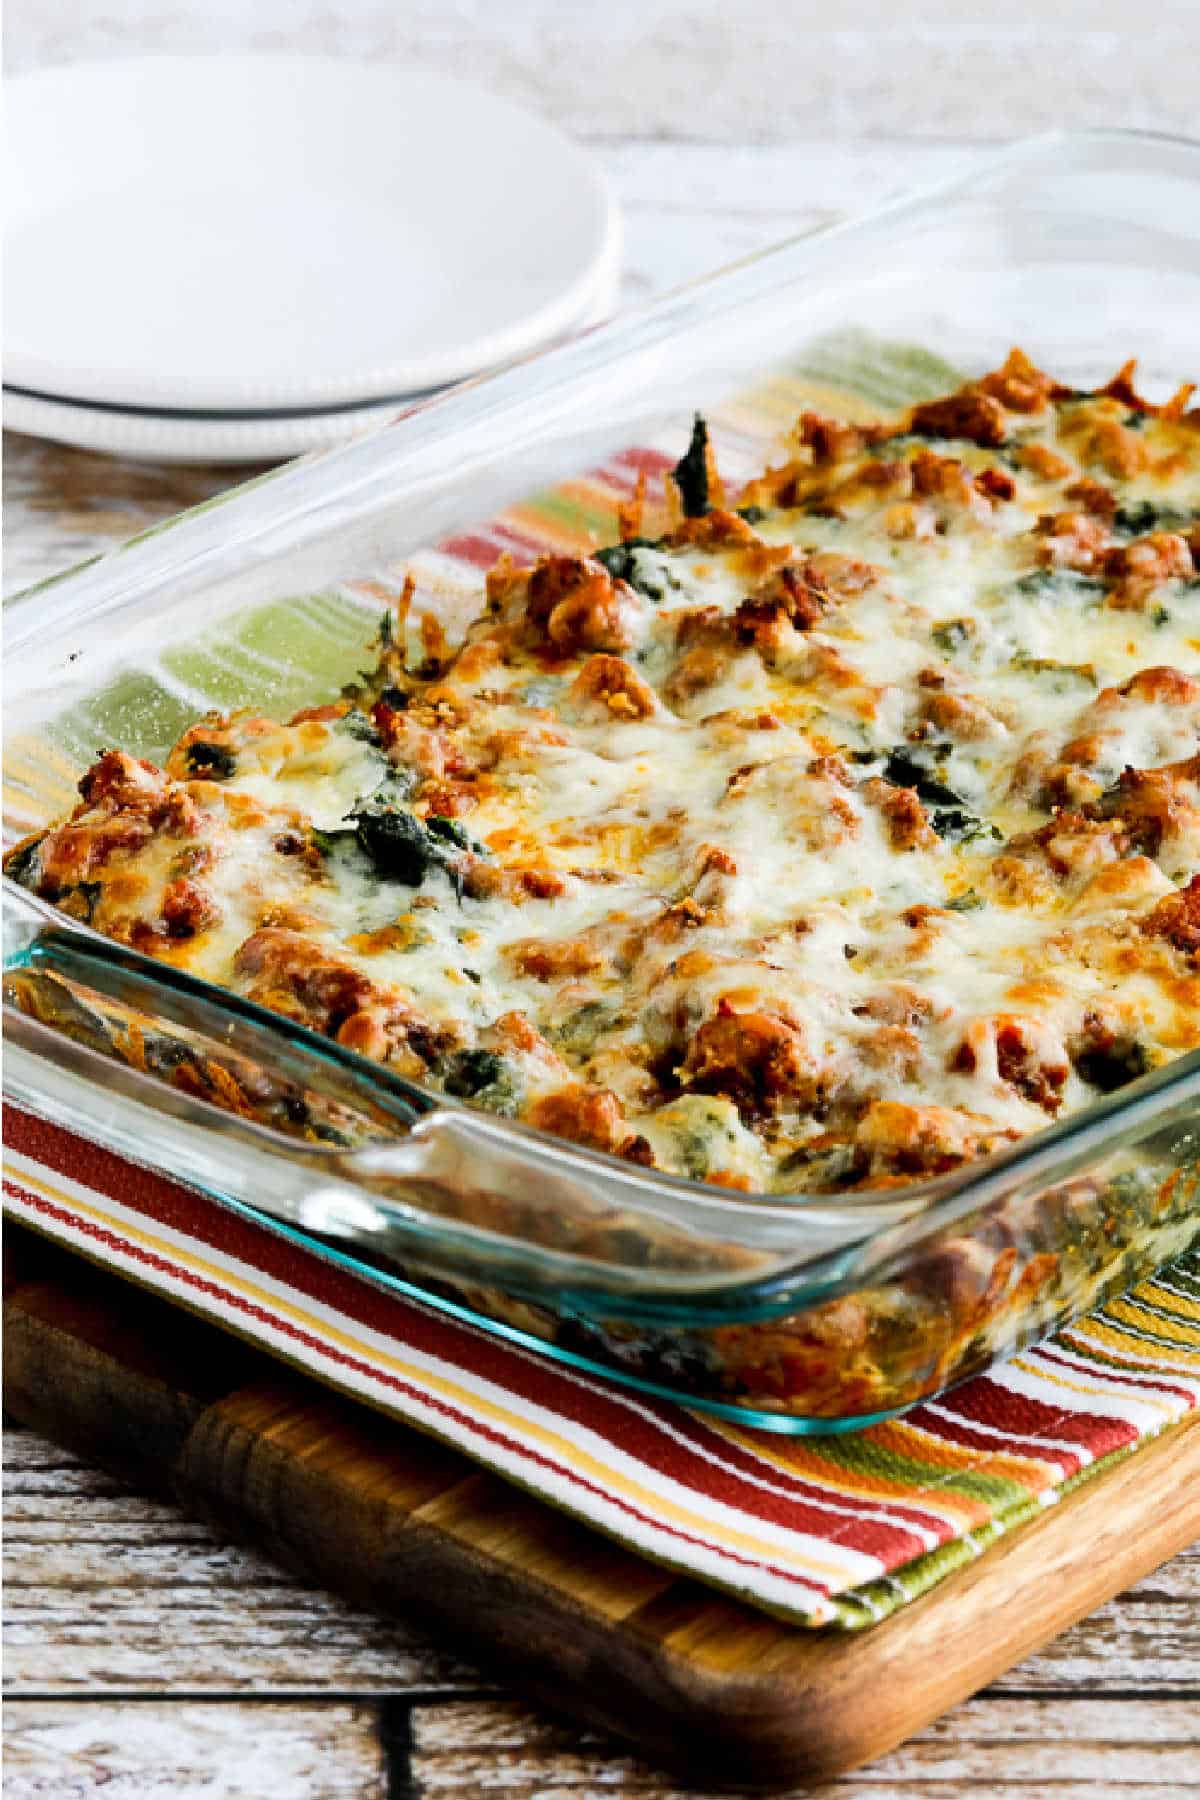 Sausage and Kale Mock Lasagna Casserole shown in baking dish on napkin over cutting board second image